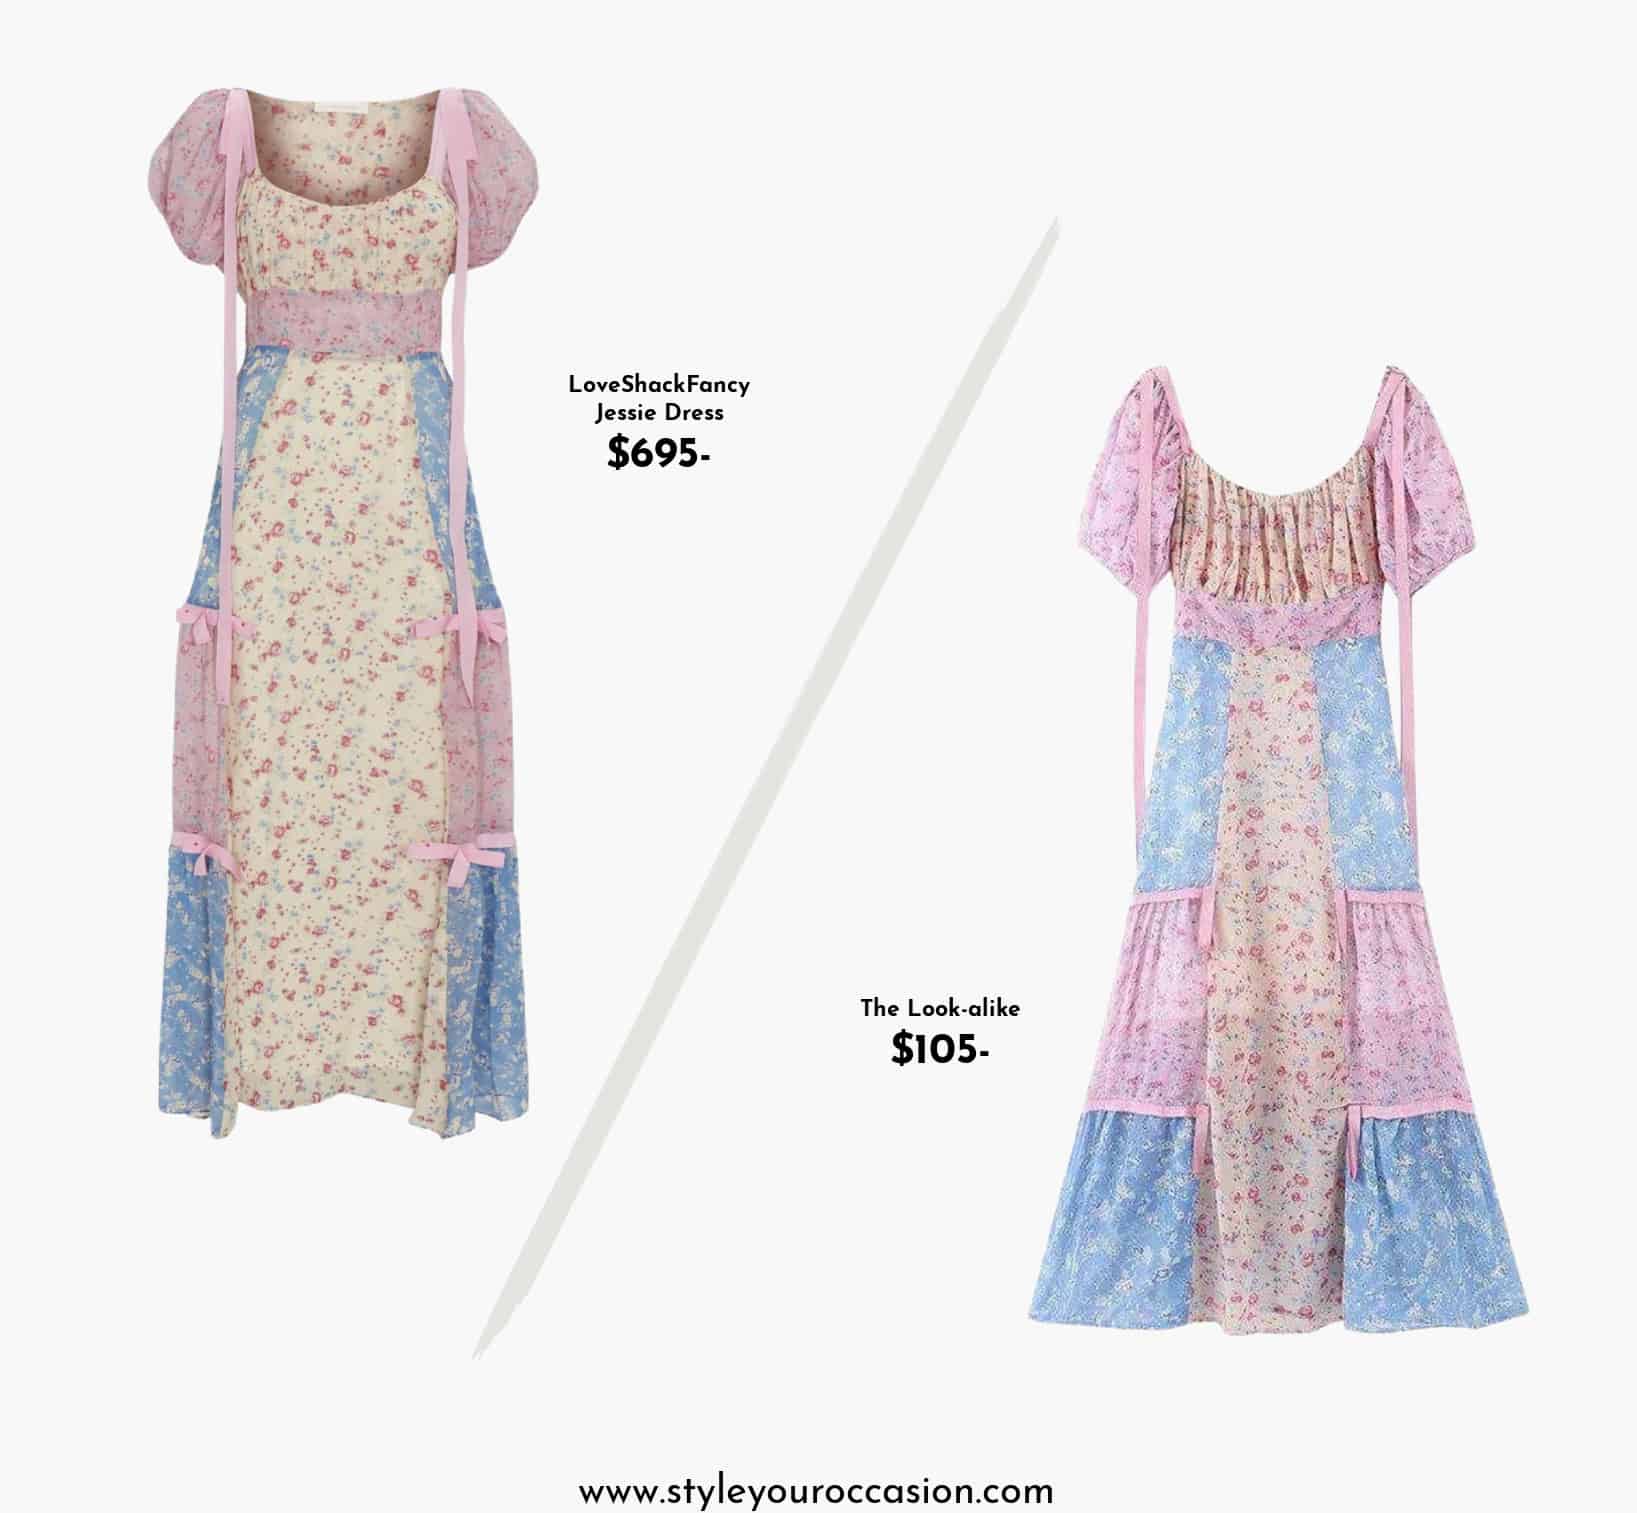 image of two patchwork floral dresses that look alike